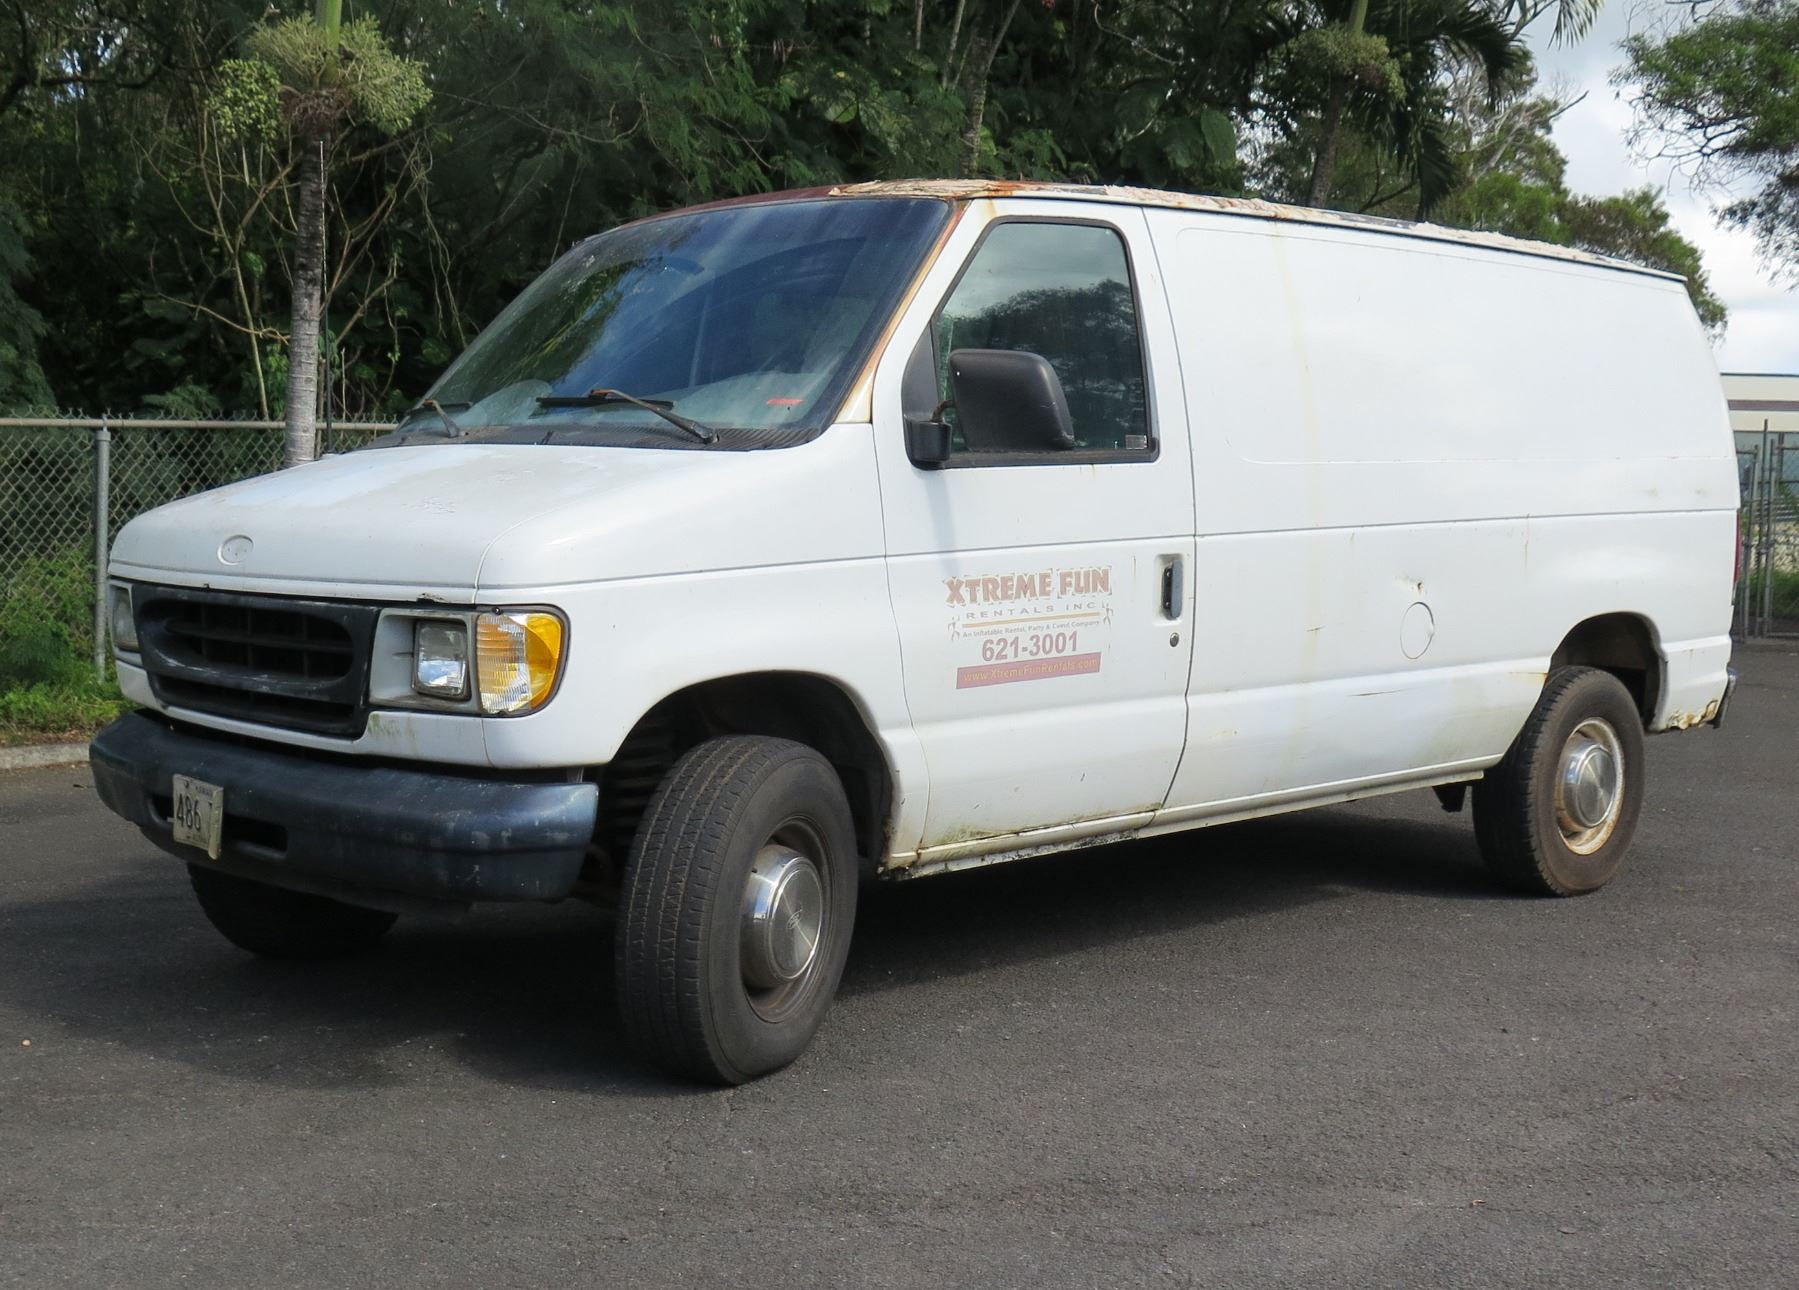 2000 Ford E250 Van, Parts/Repair, Engine Runs, Registration Expired - Oahu  Auctions